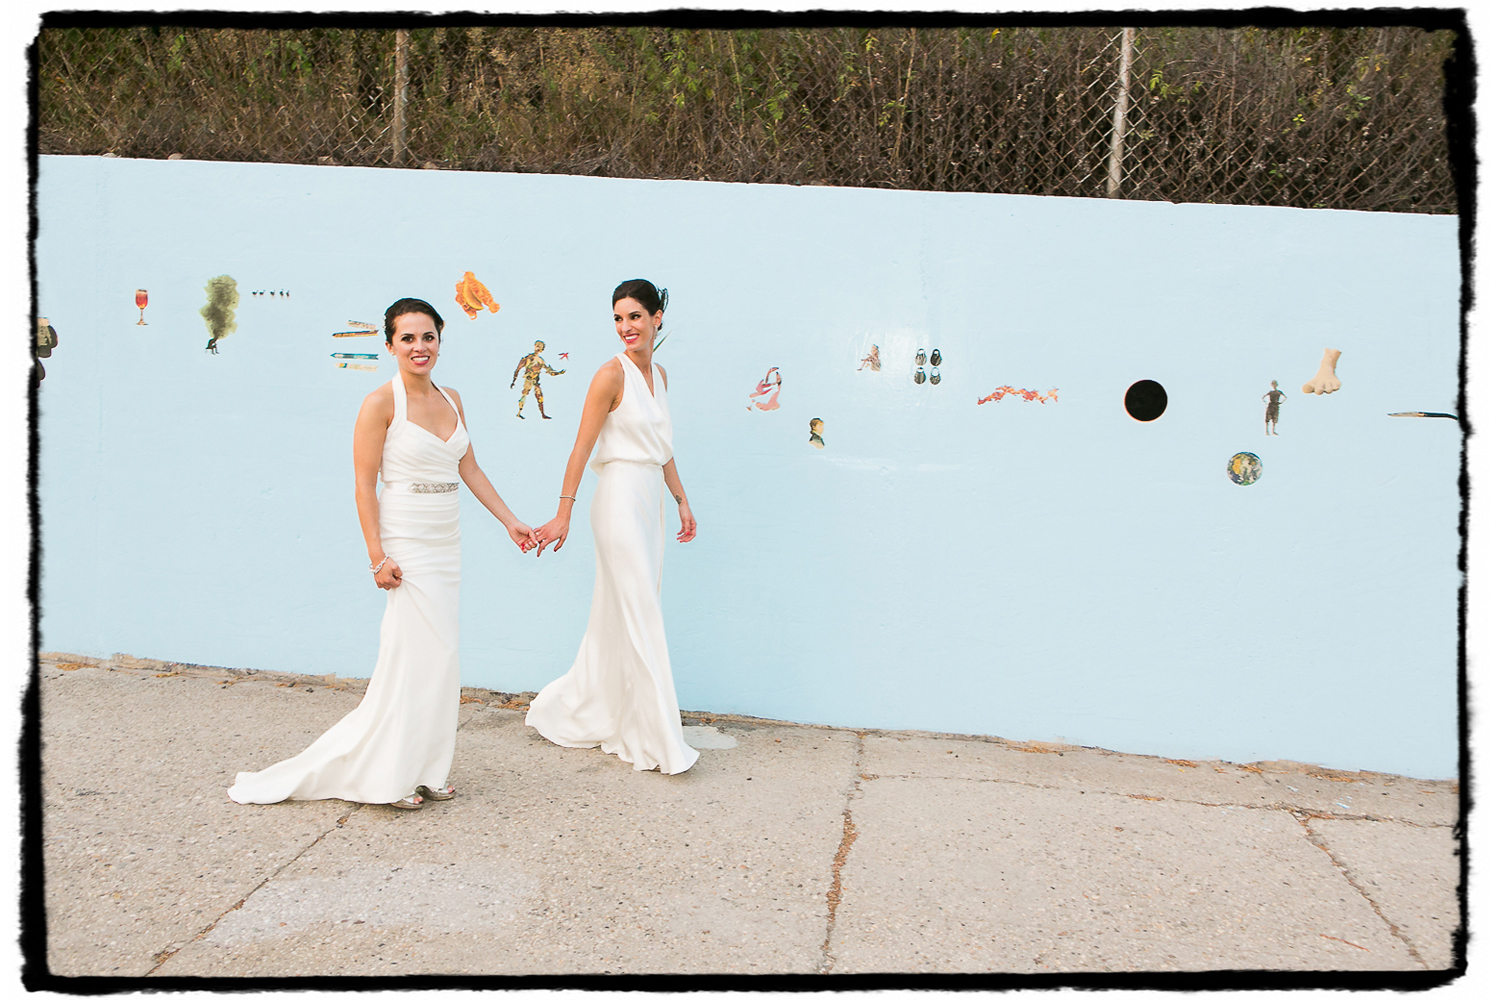 Lara and Nicole were married at The Green Building in Brooklyn and on that very day an artist was painting this particular mural behind them.  It's gone now but will live on in their wedding photographs.